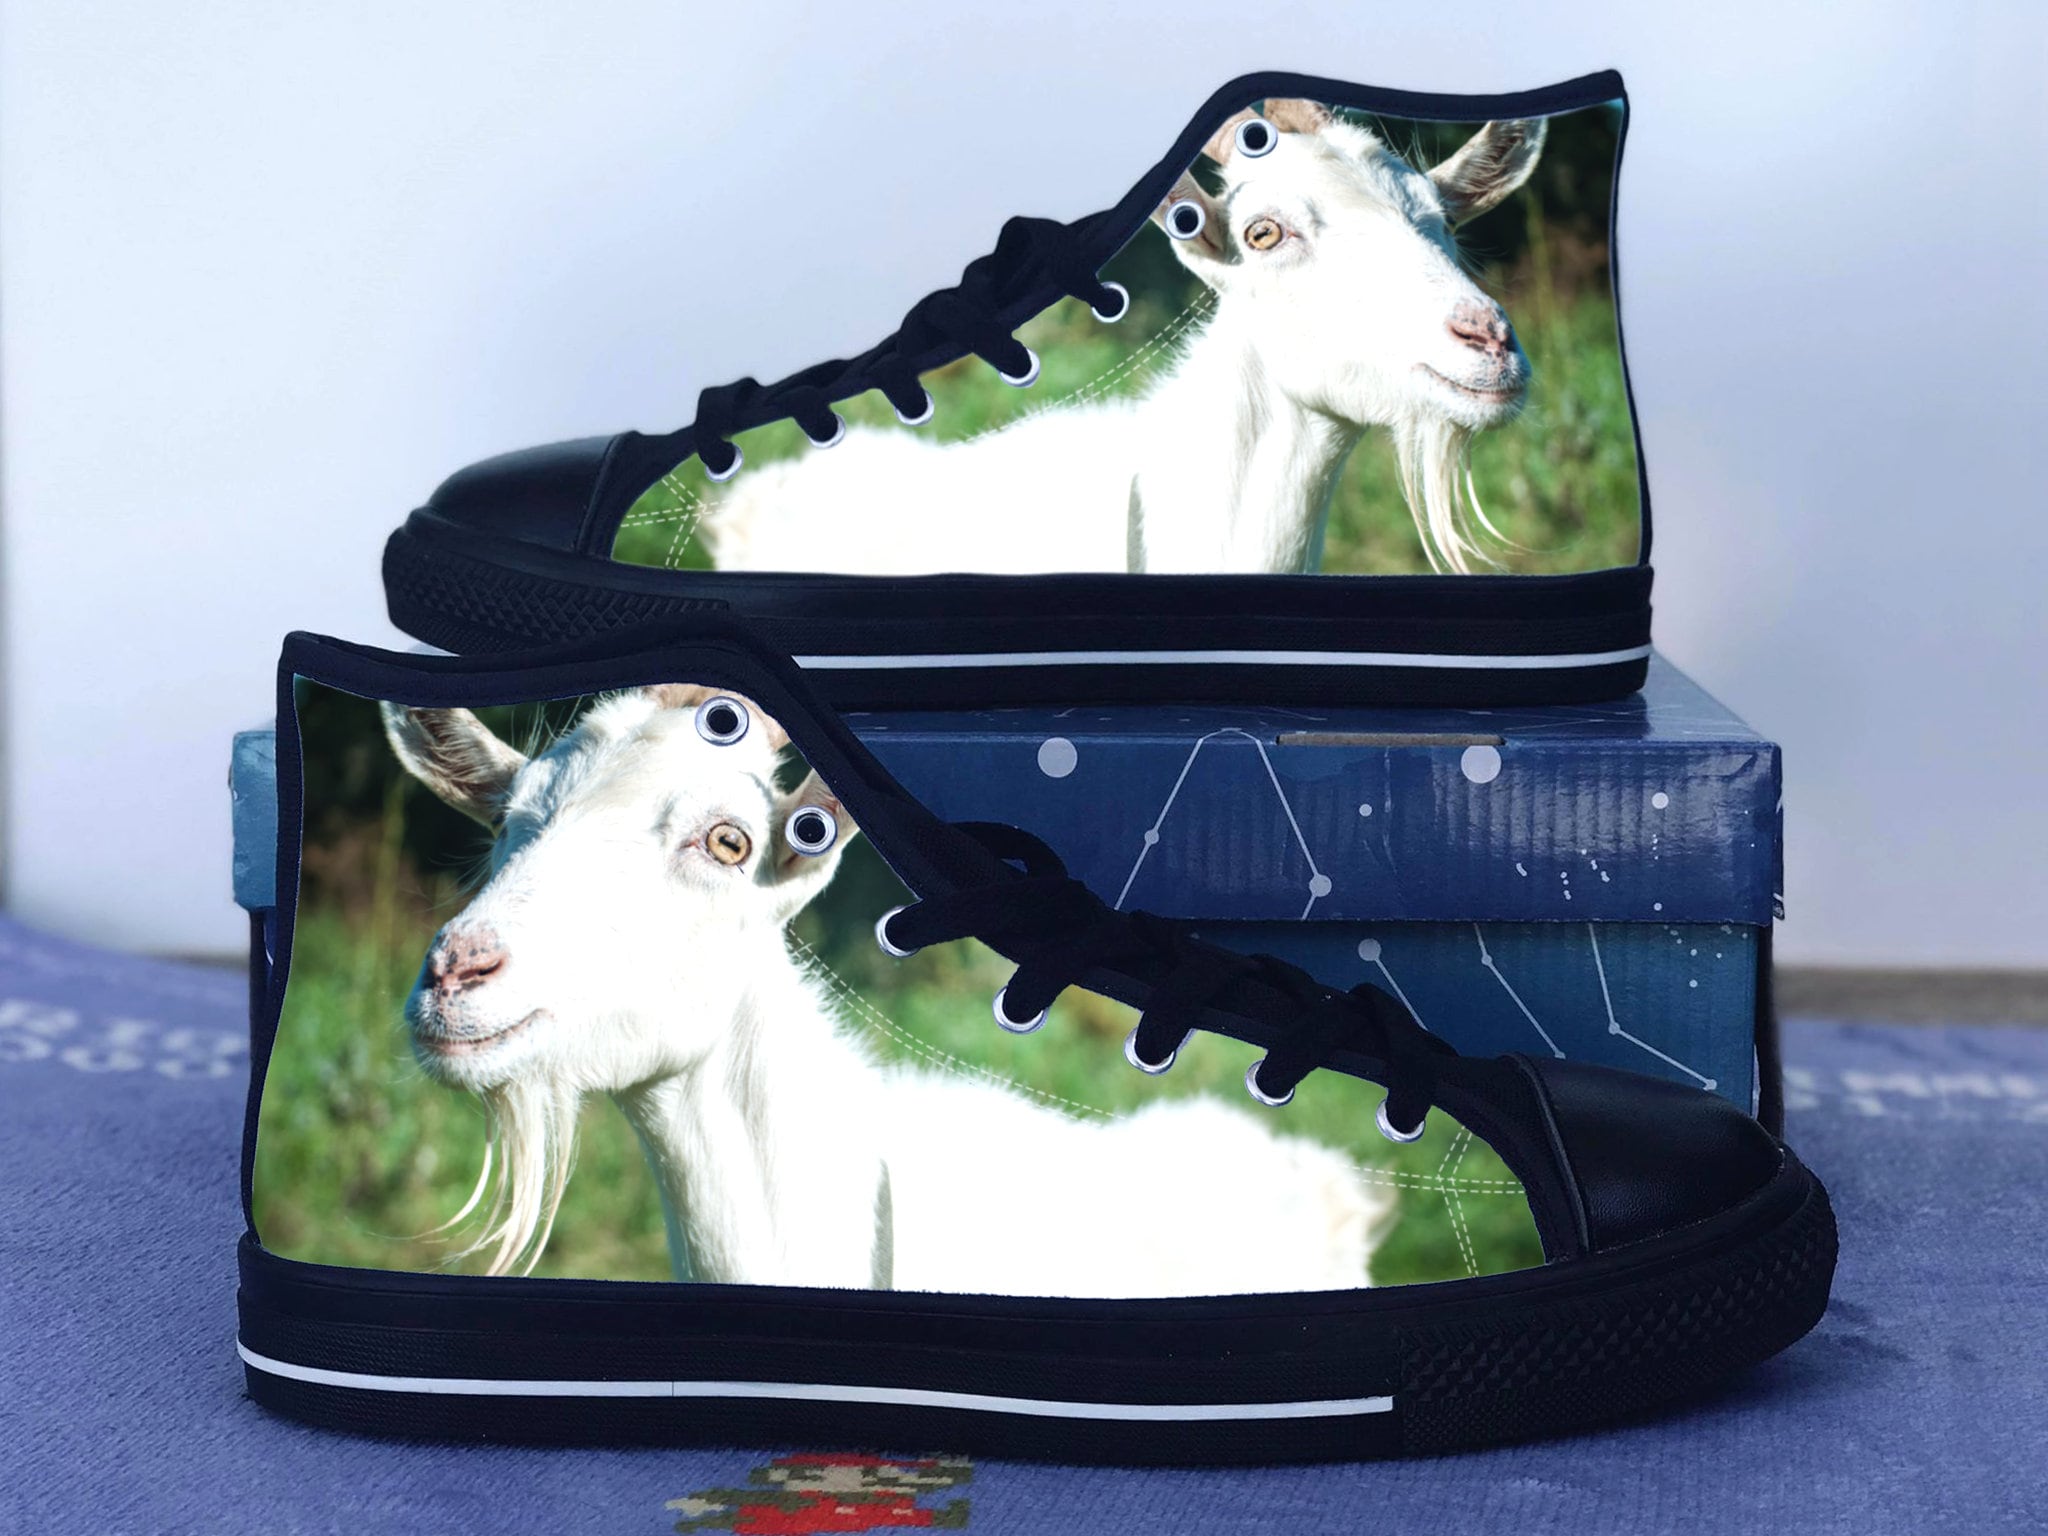 Goat Shoes GOAT Converse Greatest of All Time - Etsy